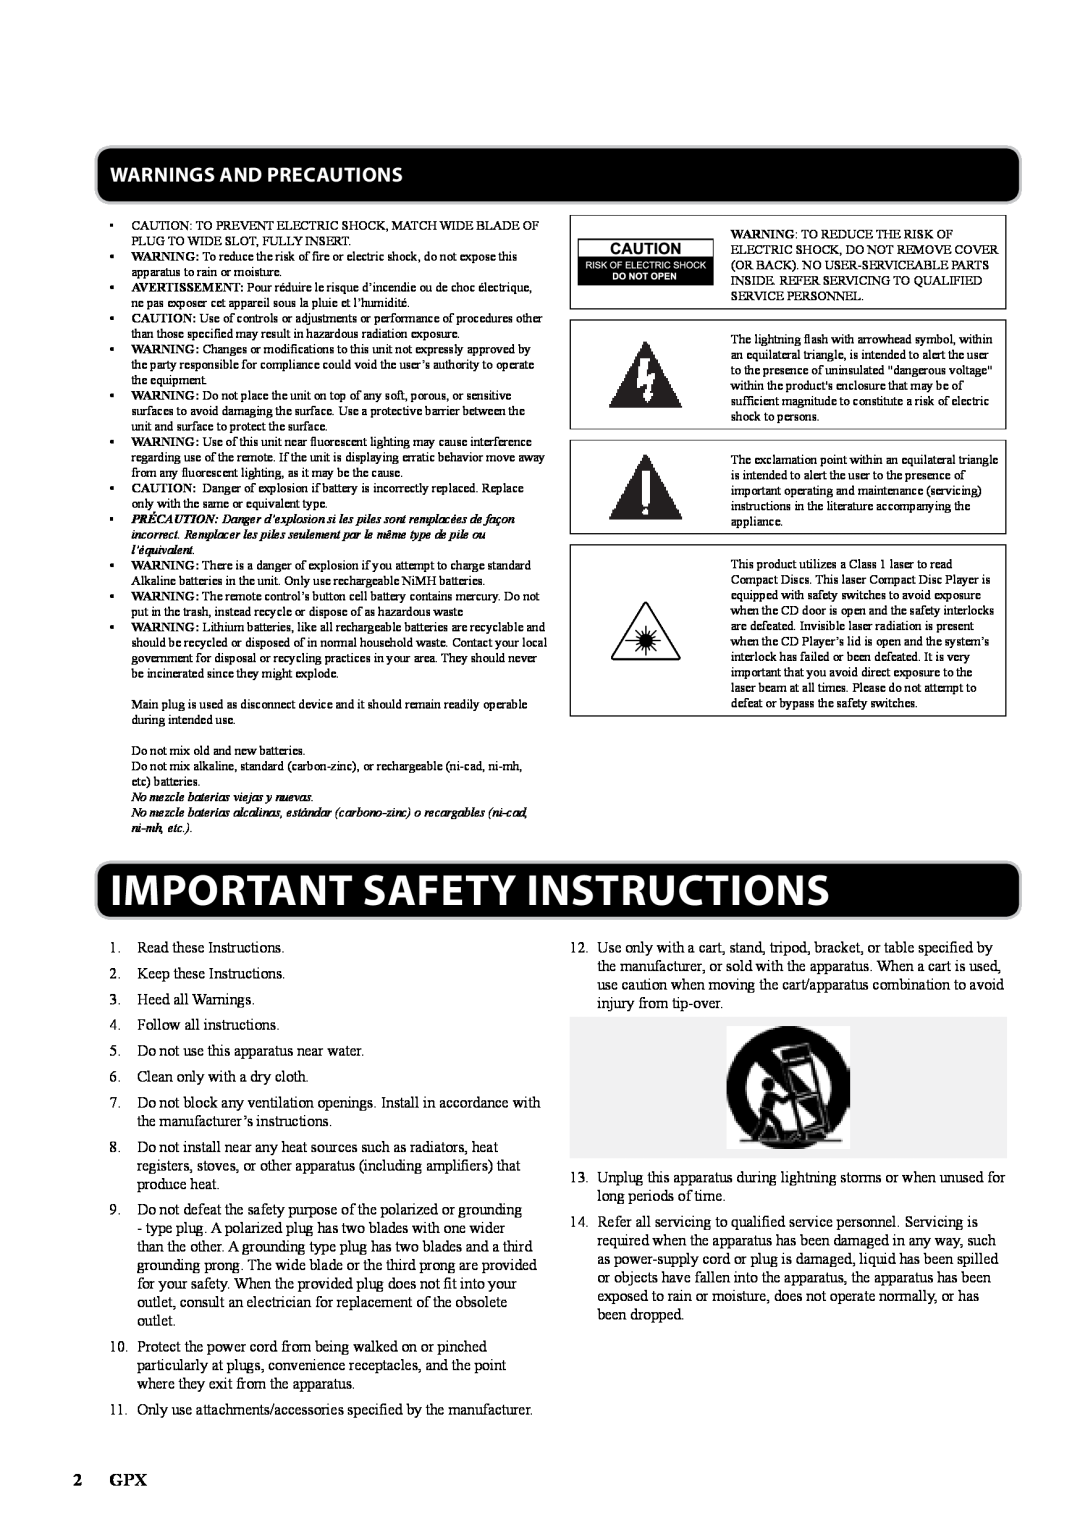 GPX BT780B, 1807-0706-10 manual Important Safety Instructions, Warnings And Precautions, 2 GPX 